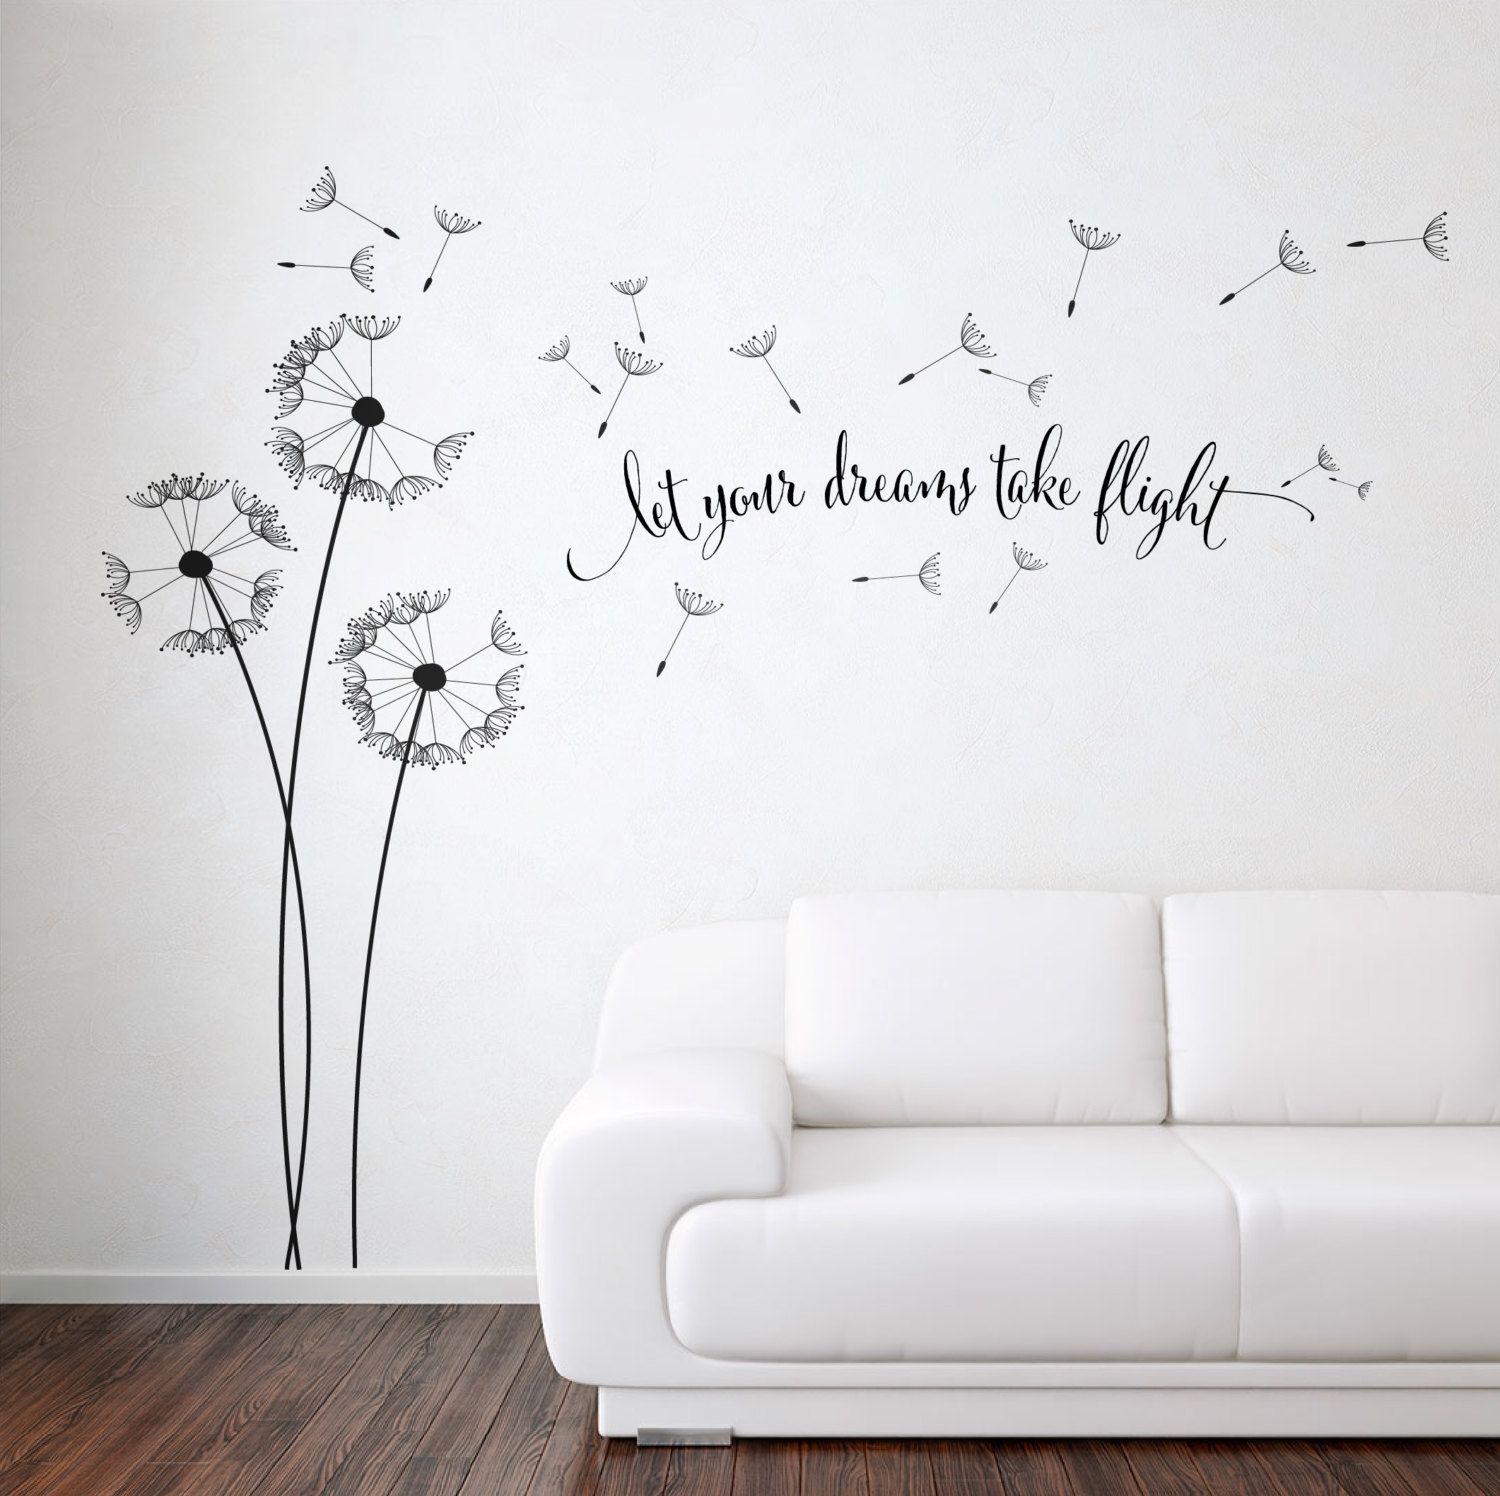 Dandelion Blowing With Quote Wall Sticker, Floral Sticker, Flower Throughout Wall Sticker Art (View 1 of 20)